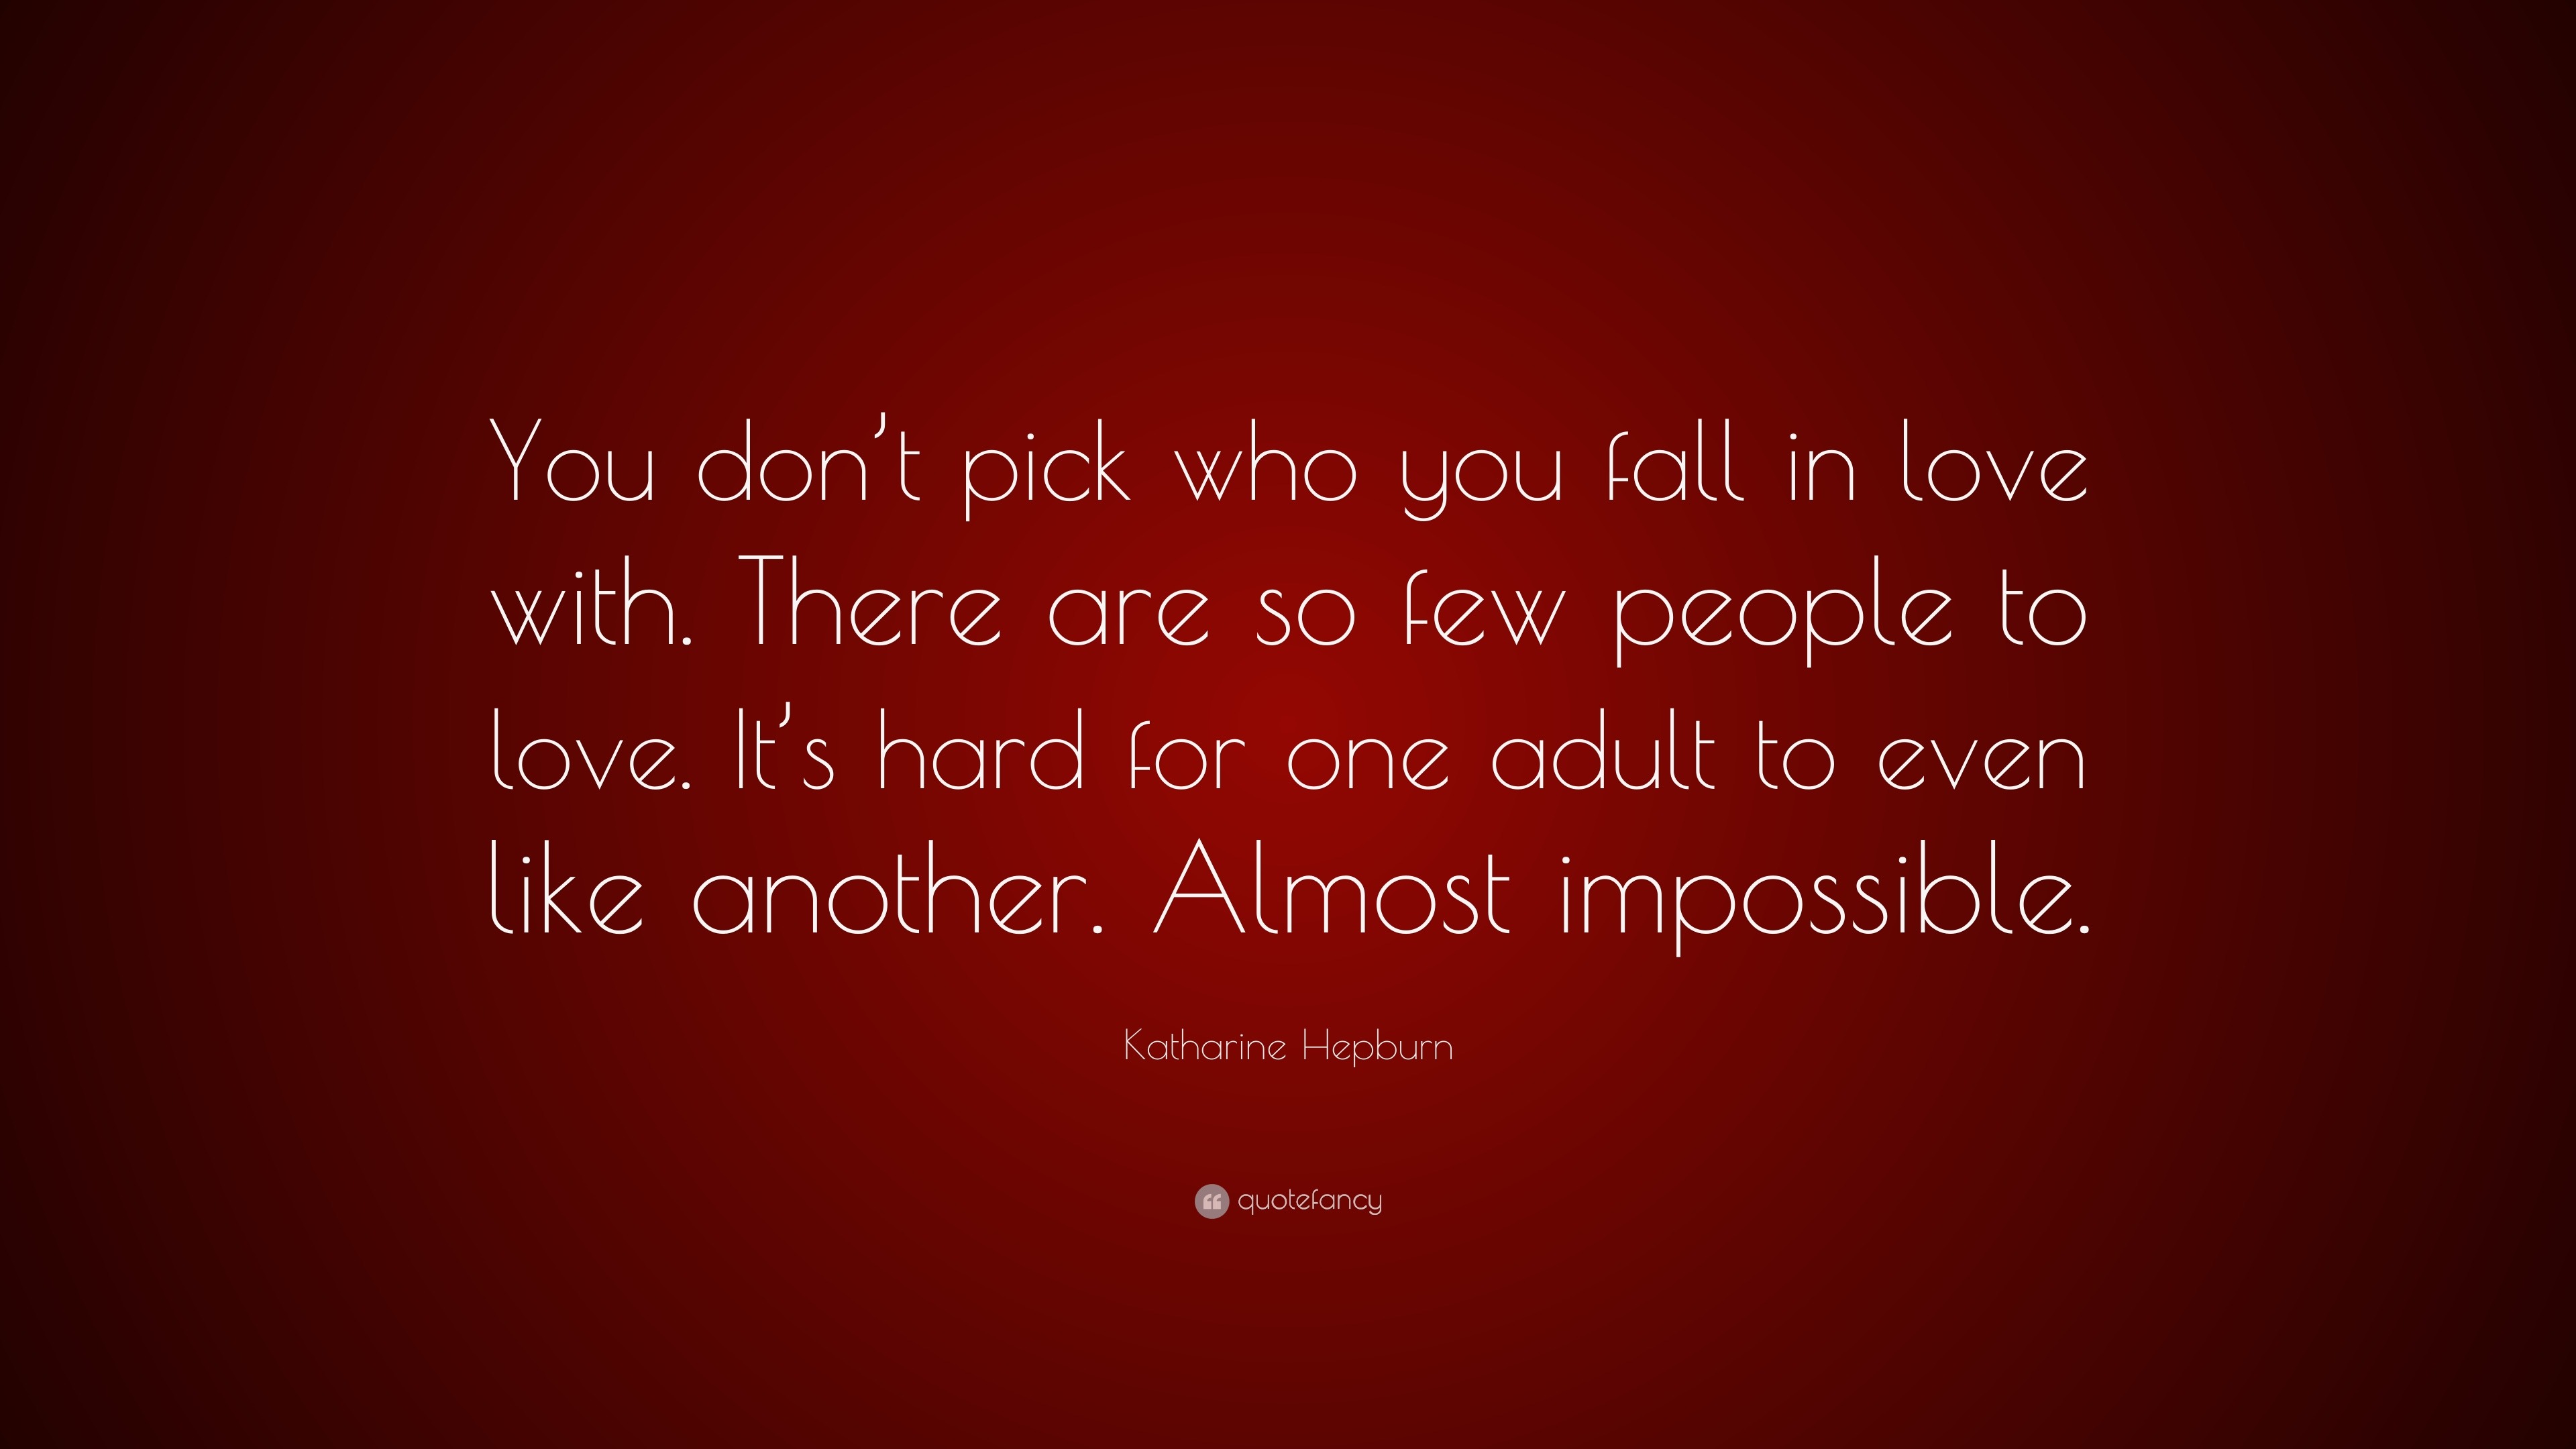 Katharine Hepburn Quote “You don t pick who you fall in love with